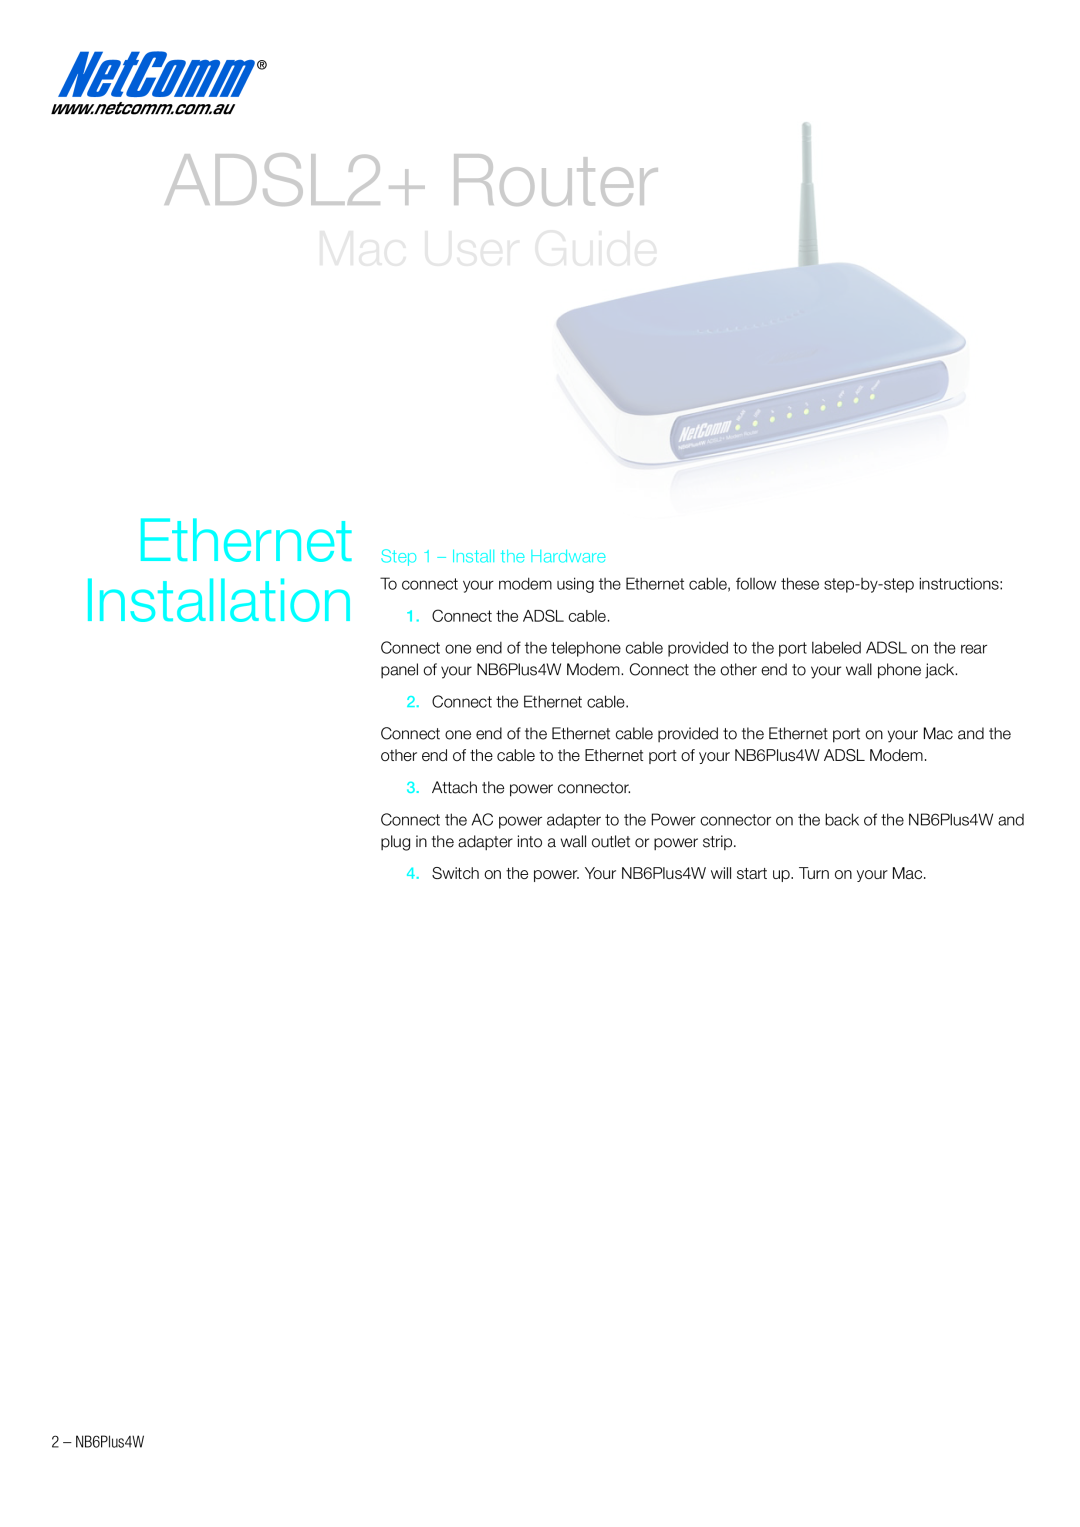 NetComm NB6PLUS4W quick start Install the Hardware, ADSL2+ Router, Ethernet Installation, Mac User Guide 